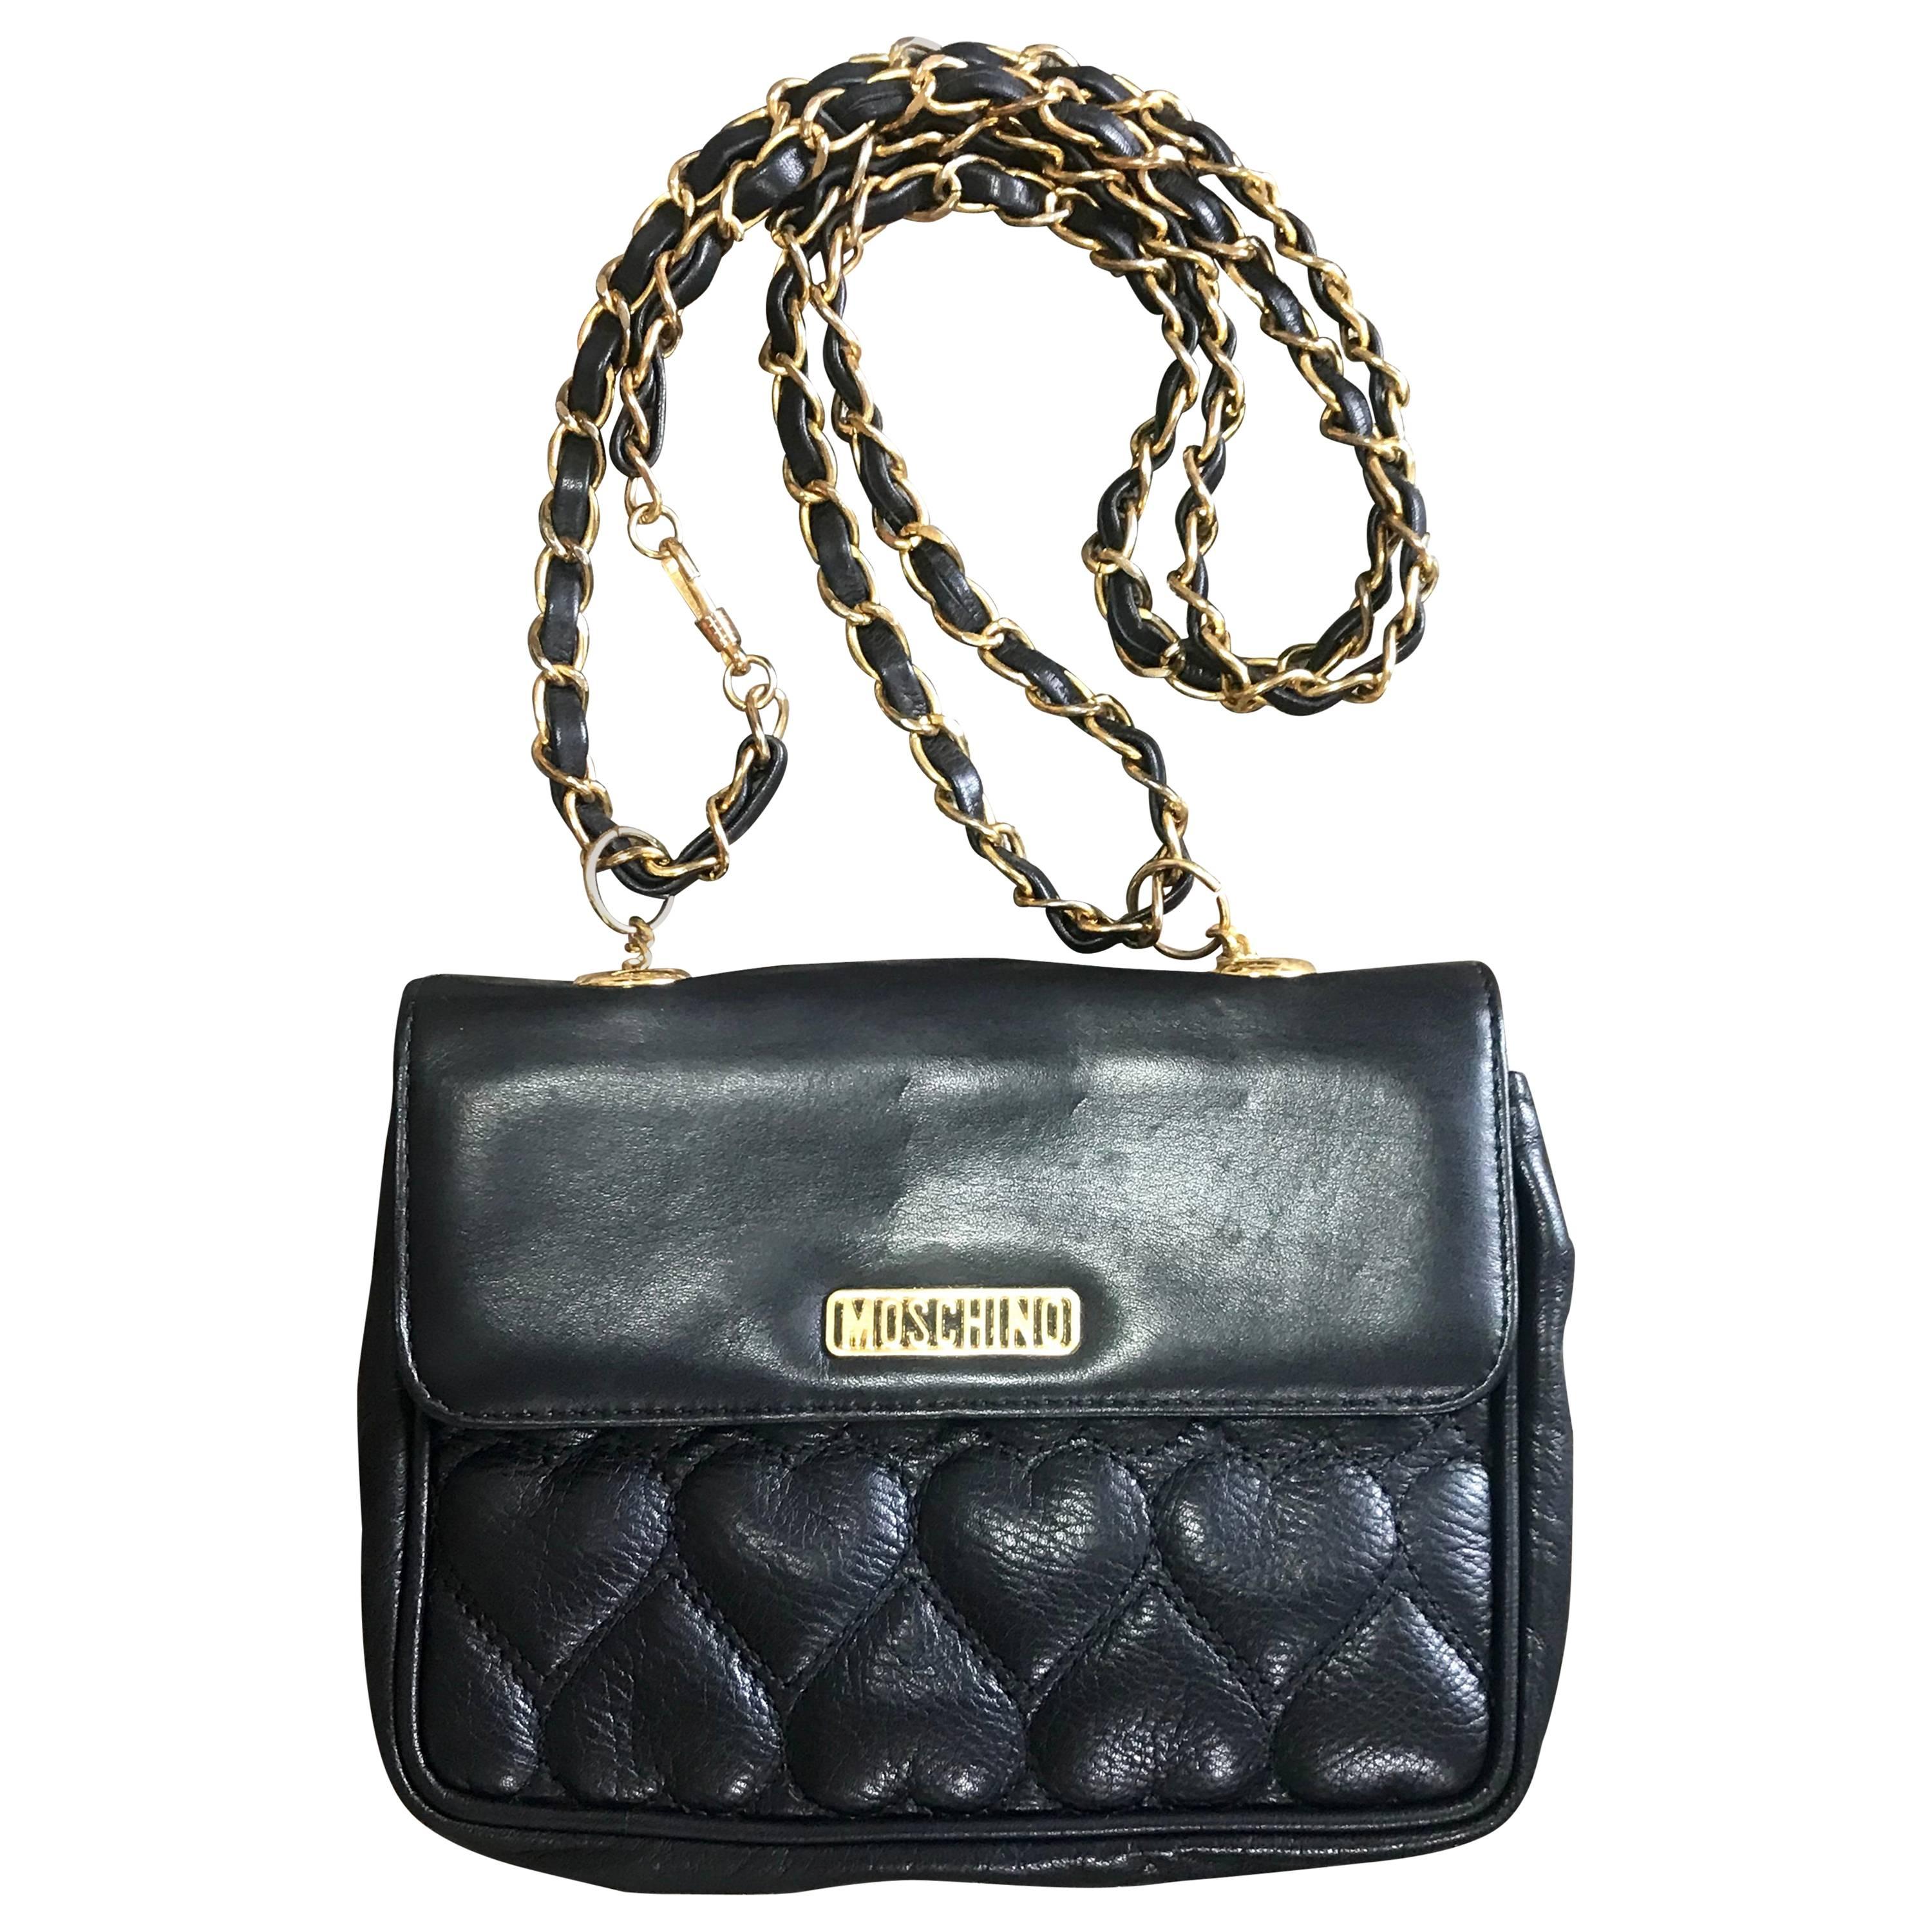 Vintage MOSCHINO black heart shape stitch shoulder bag, fanny pack with chains.